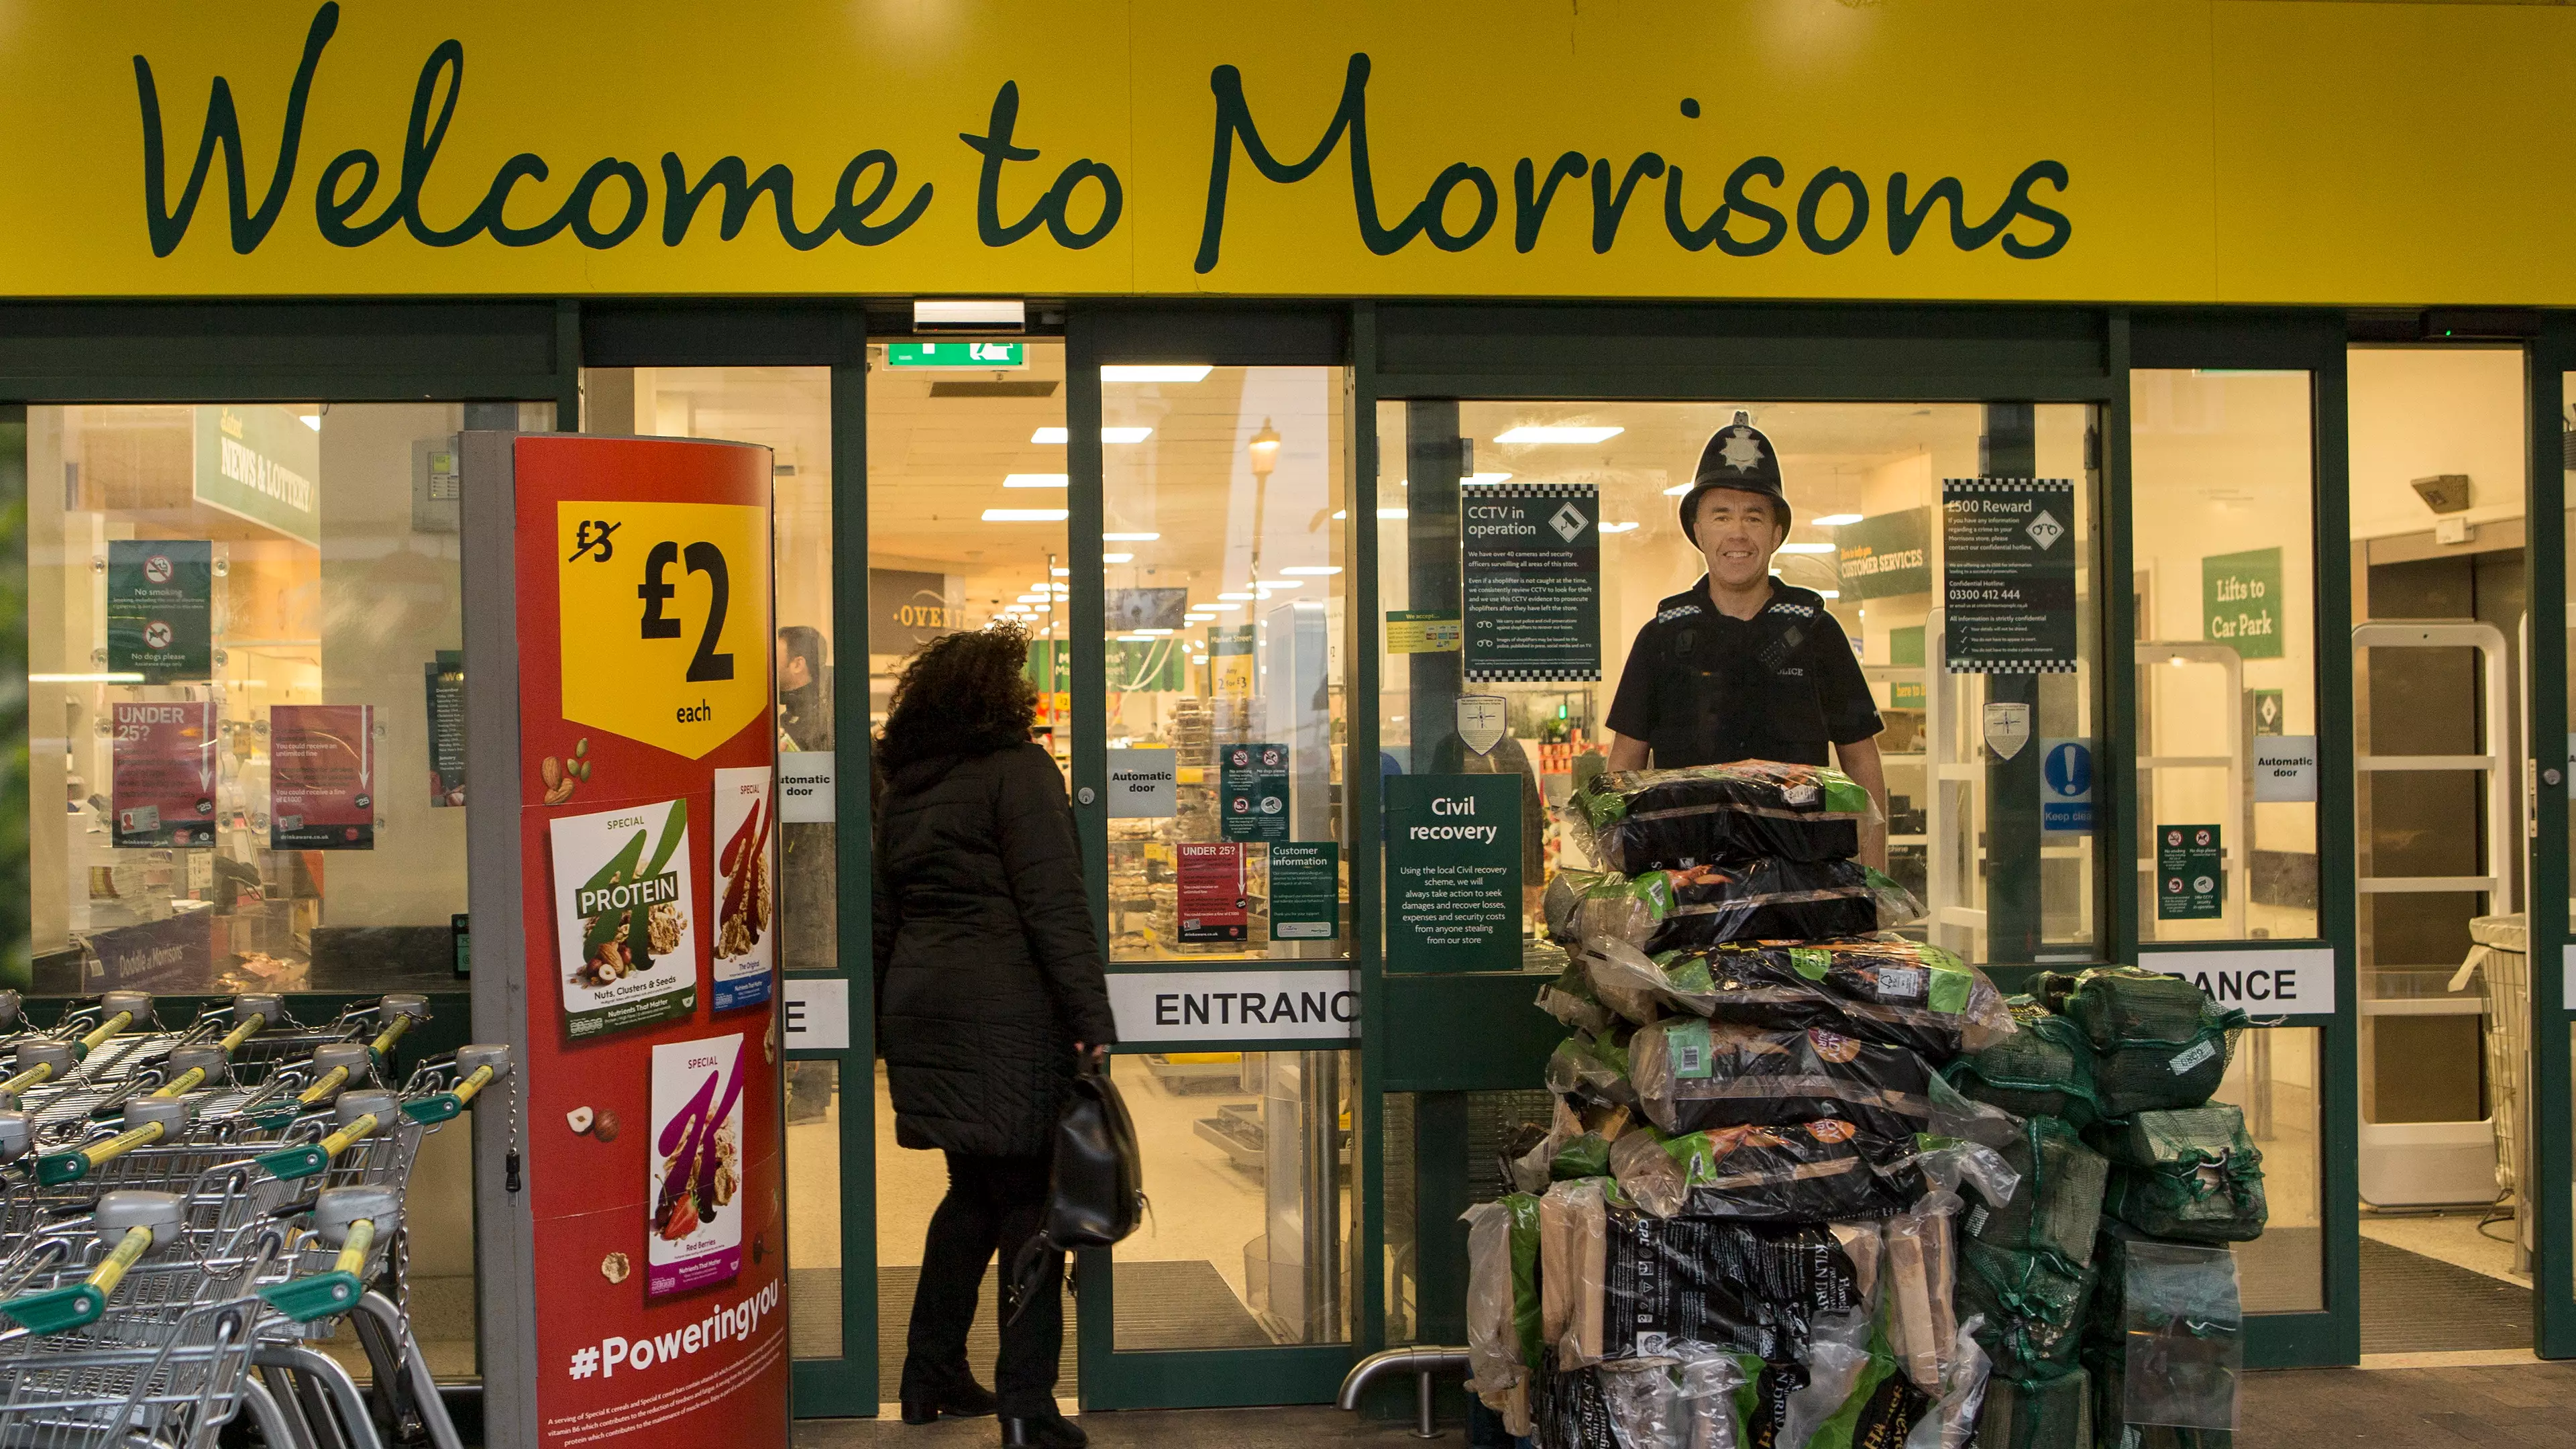 Morrisons Installing Protective Screens At Checkouts To Protect People Amid Coronavirus